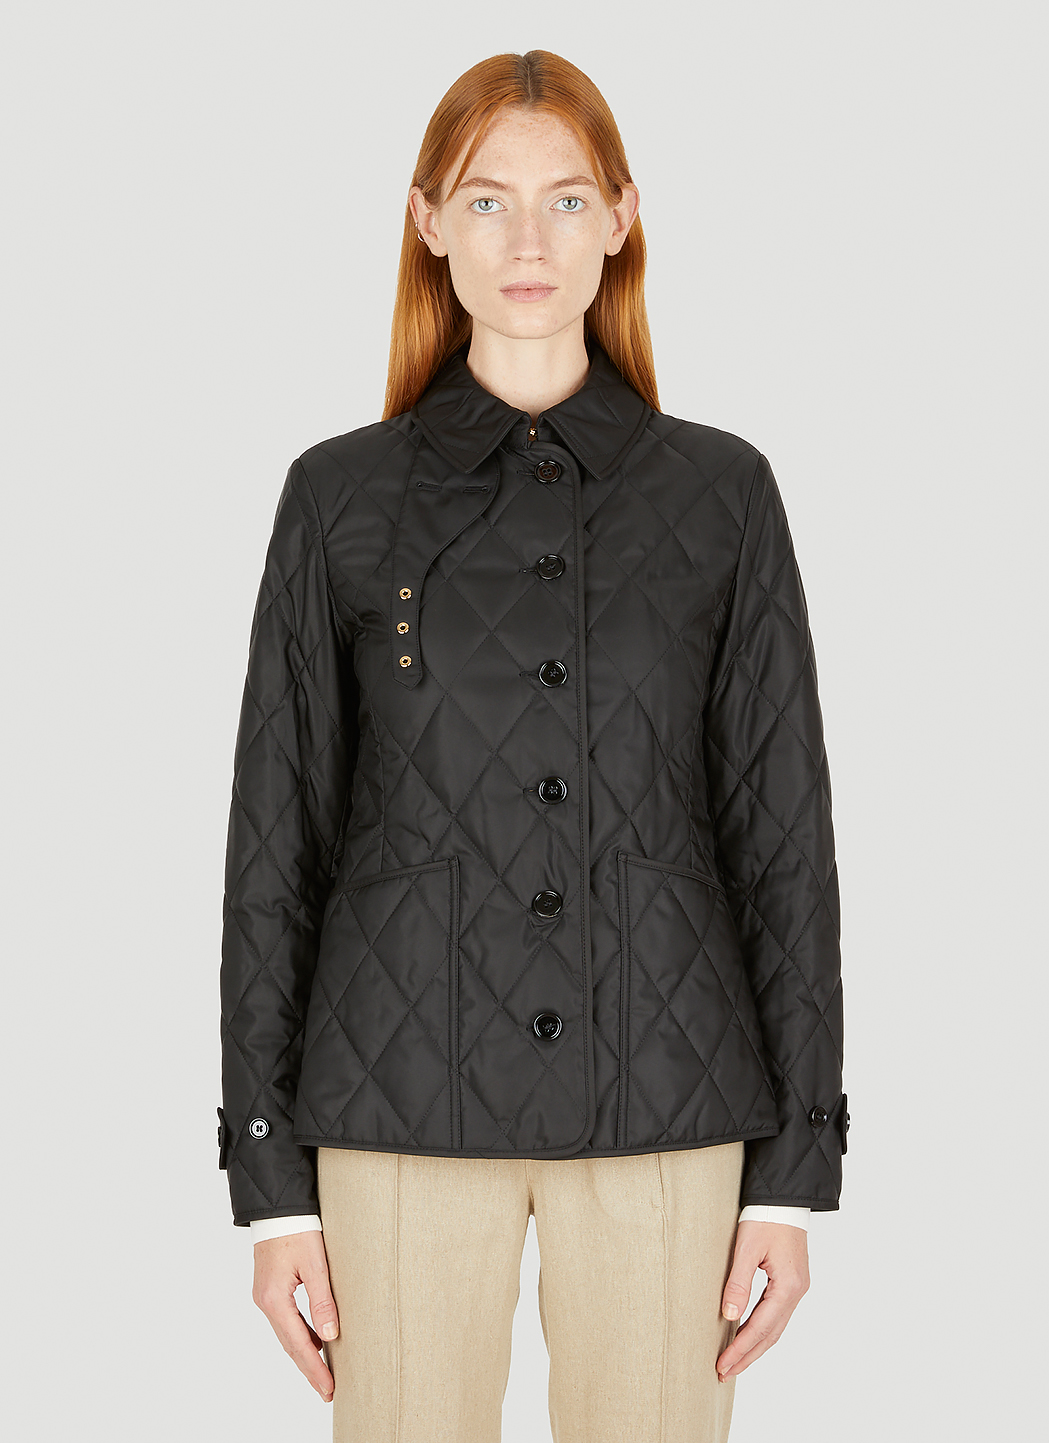 Fernleigh Quilted Jacket